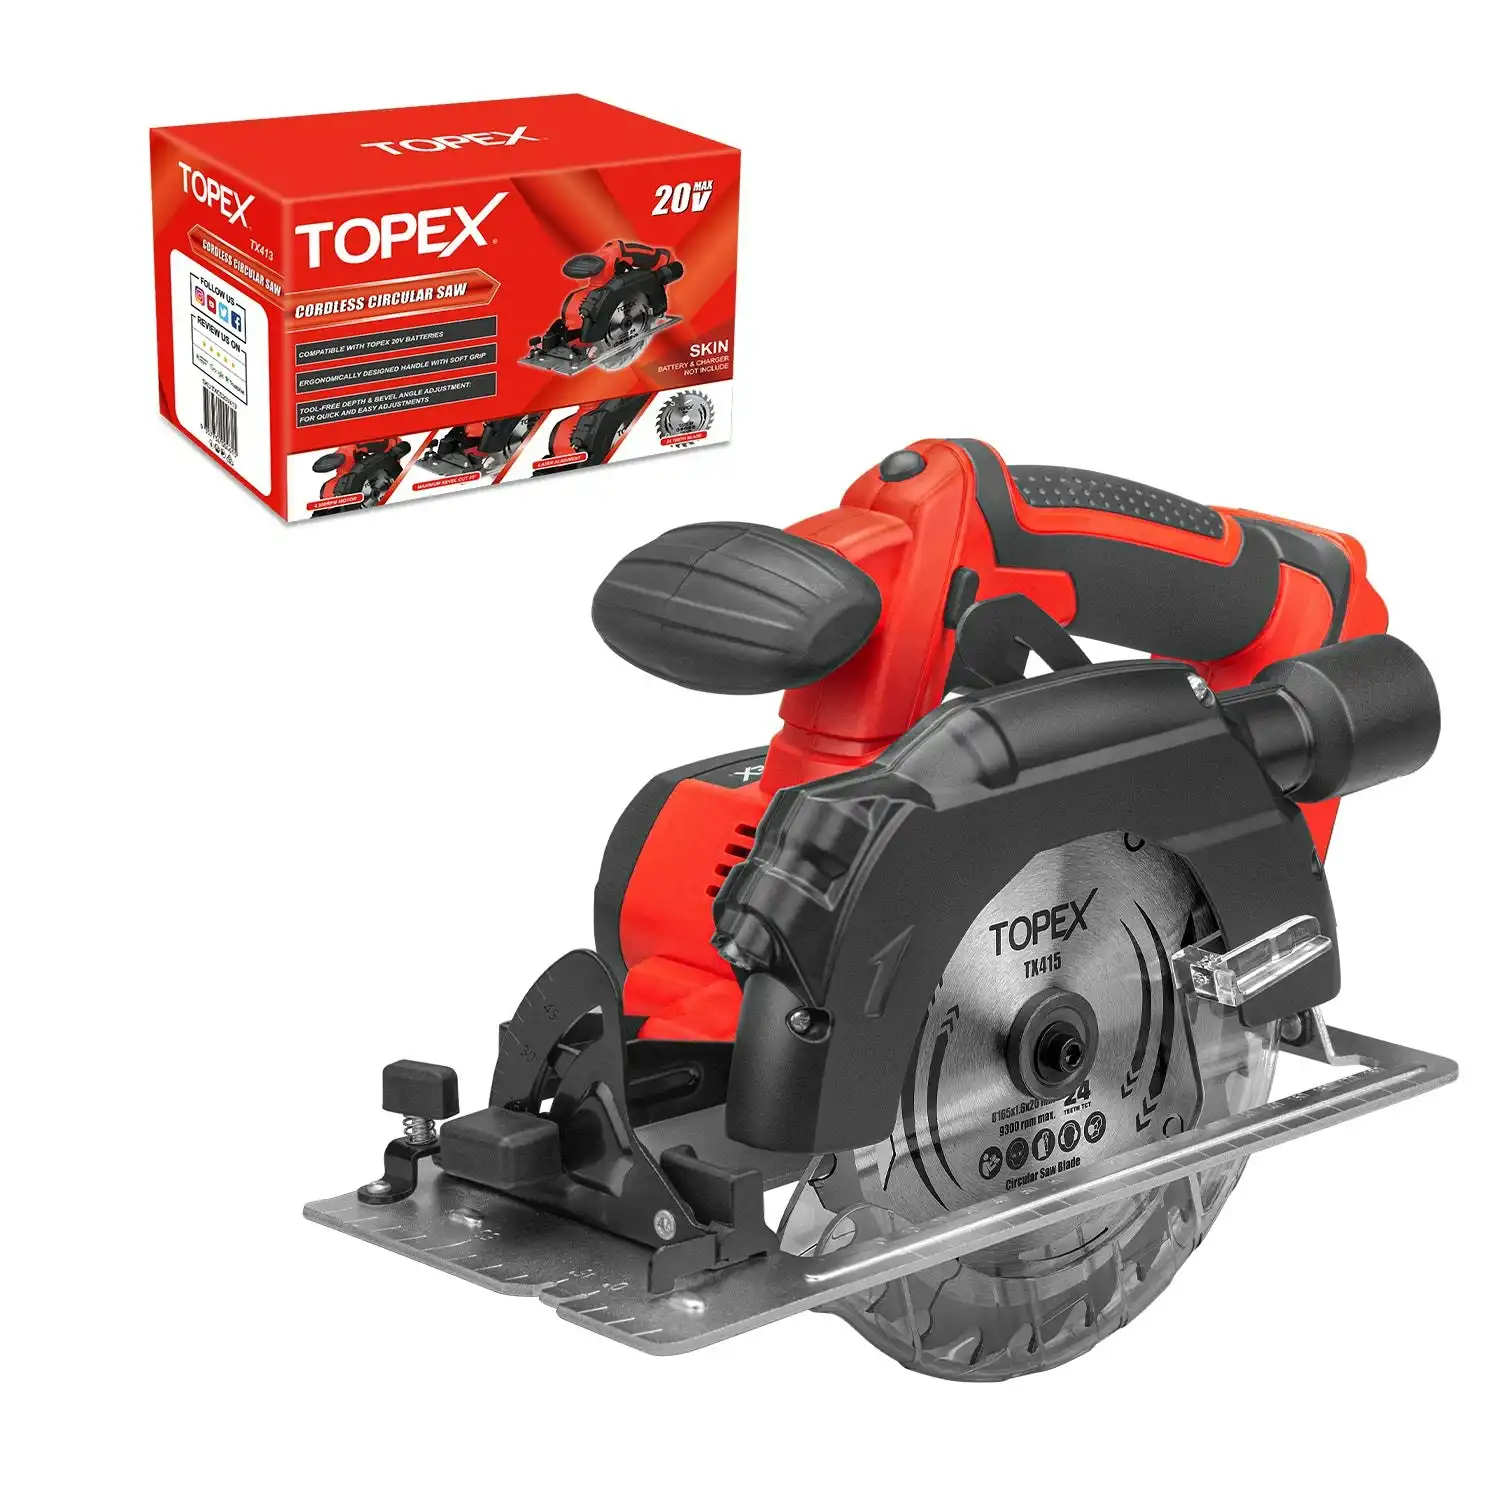 Topex 20v 165mm Cordless Circular Saw Skin Only Without Battery